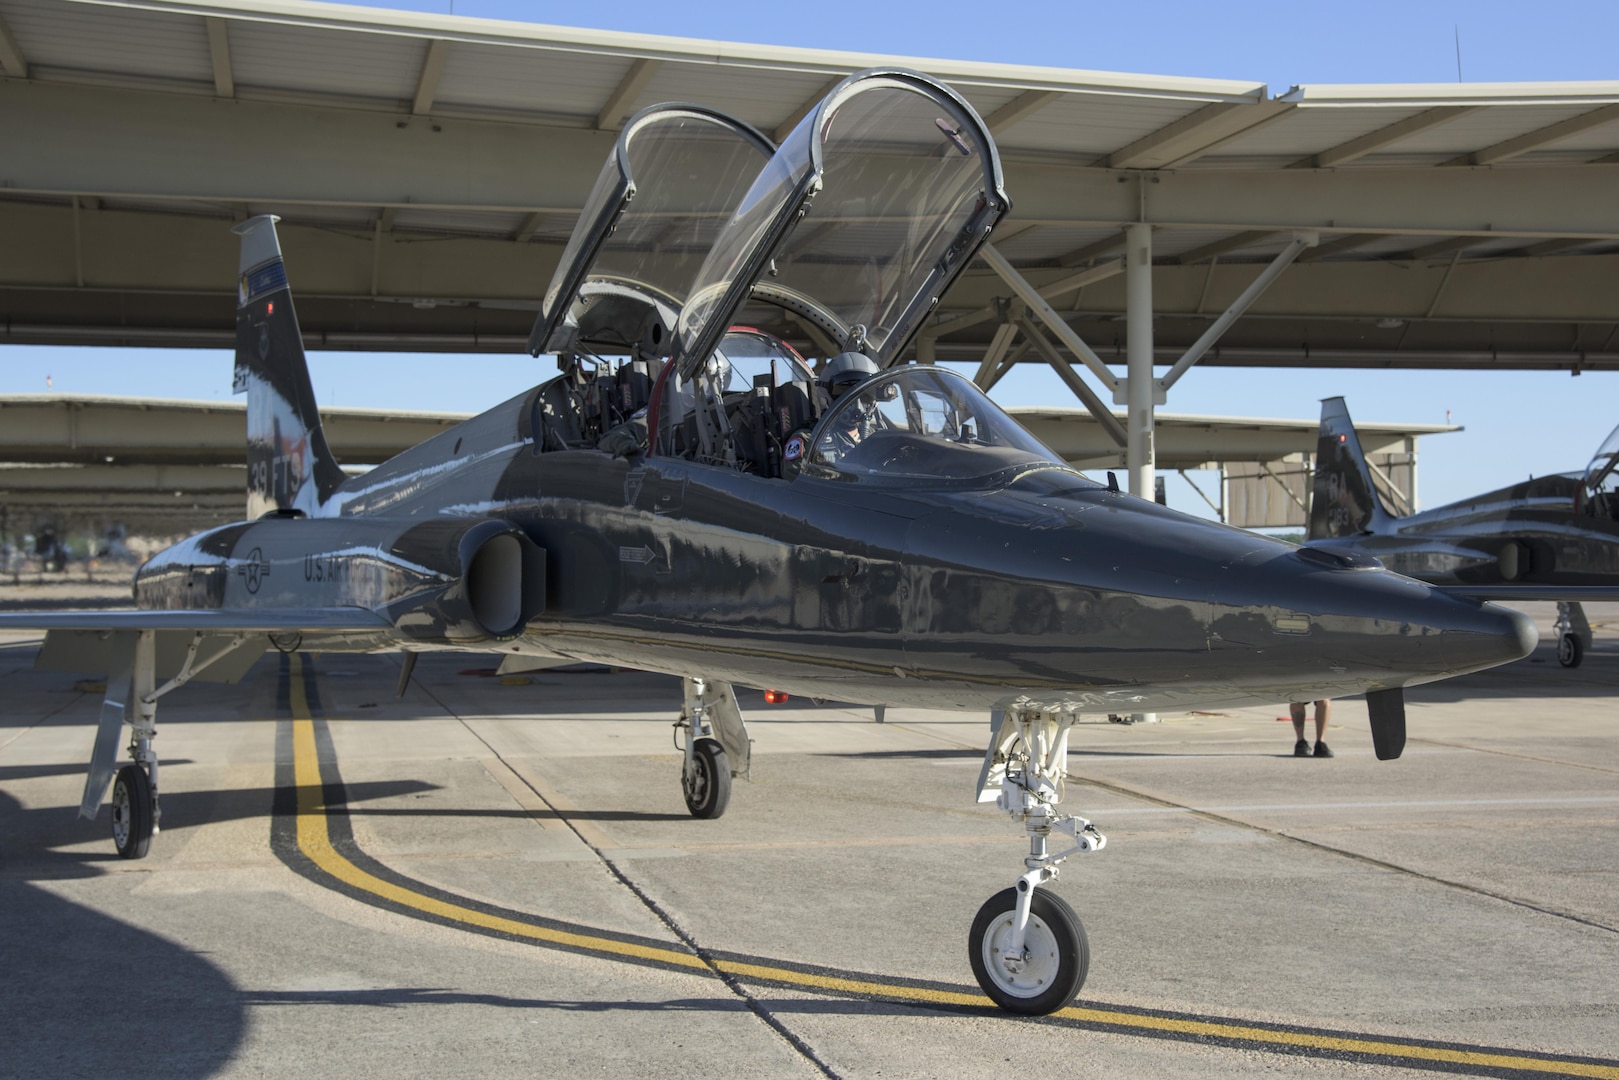 A T-38 Talon operated by members of the 39th Flying Training Squadron taxis out May 4, 2017, at Joint Base San Antonio-Randolph, Texas, during the Cobras in the Clouds exercise. The exercise gave 39th FTS members a chance to practice their war-time mission of taking control of the training mission of the 12th Operations Group. (U.S. Air Force photo by Senior Airman Stormy Archer)